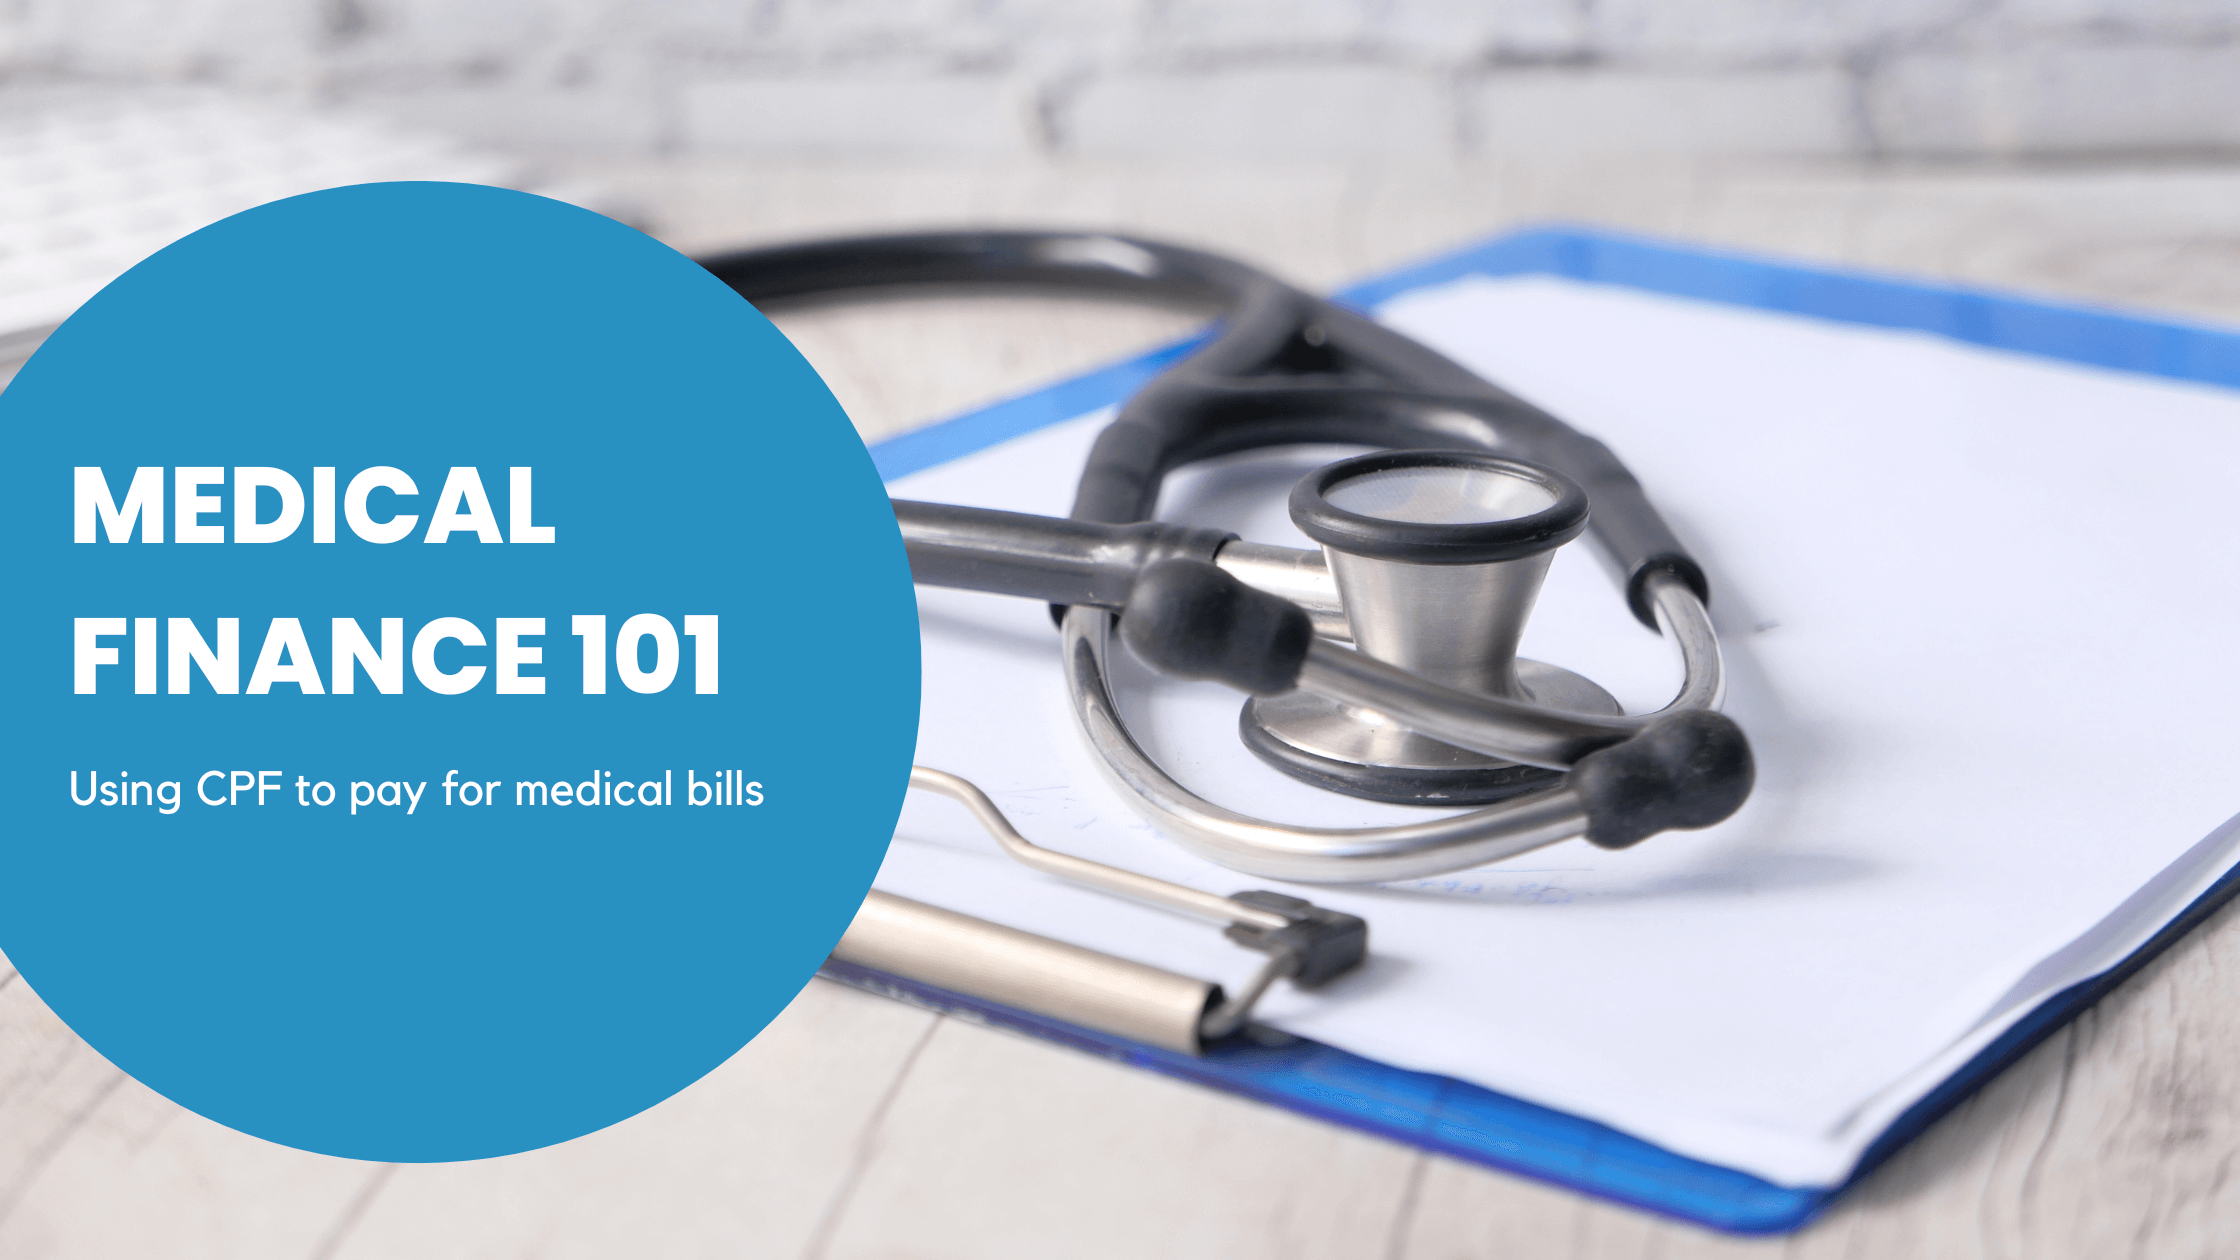 Medical Finance 101: Using CPF to pay for medical bills